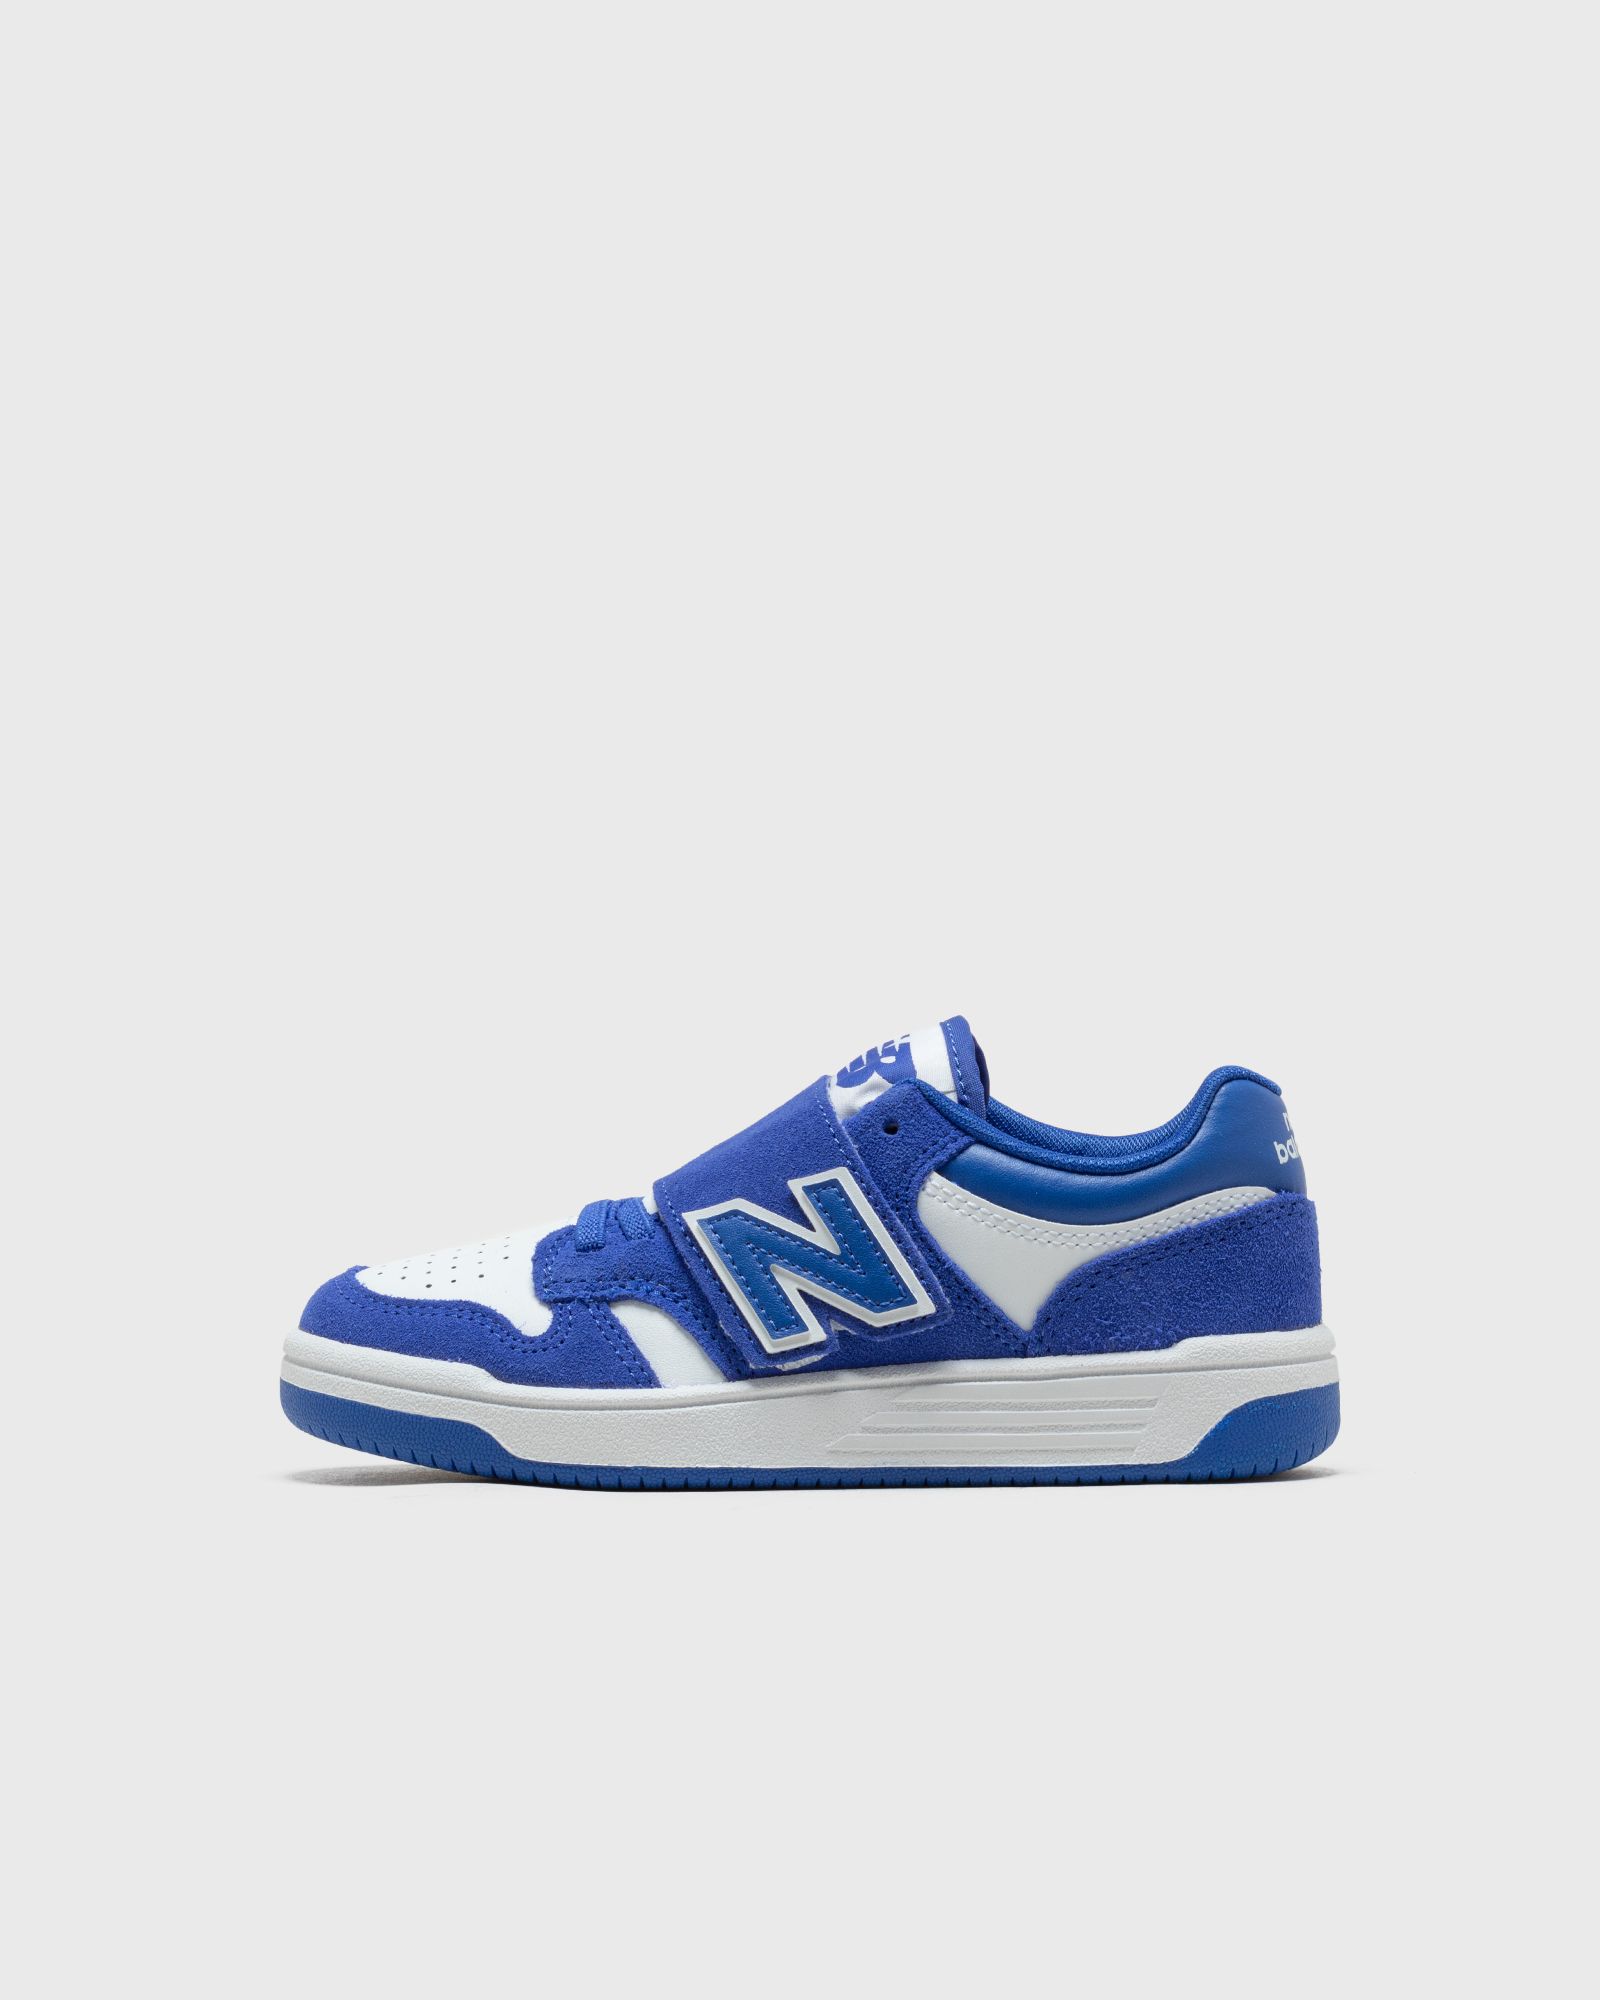 New Balance - phb480v1  sneakers blue|white in größe:28